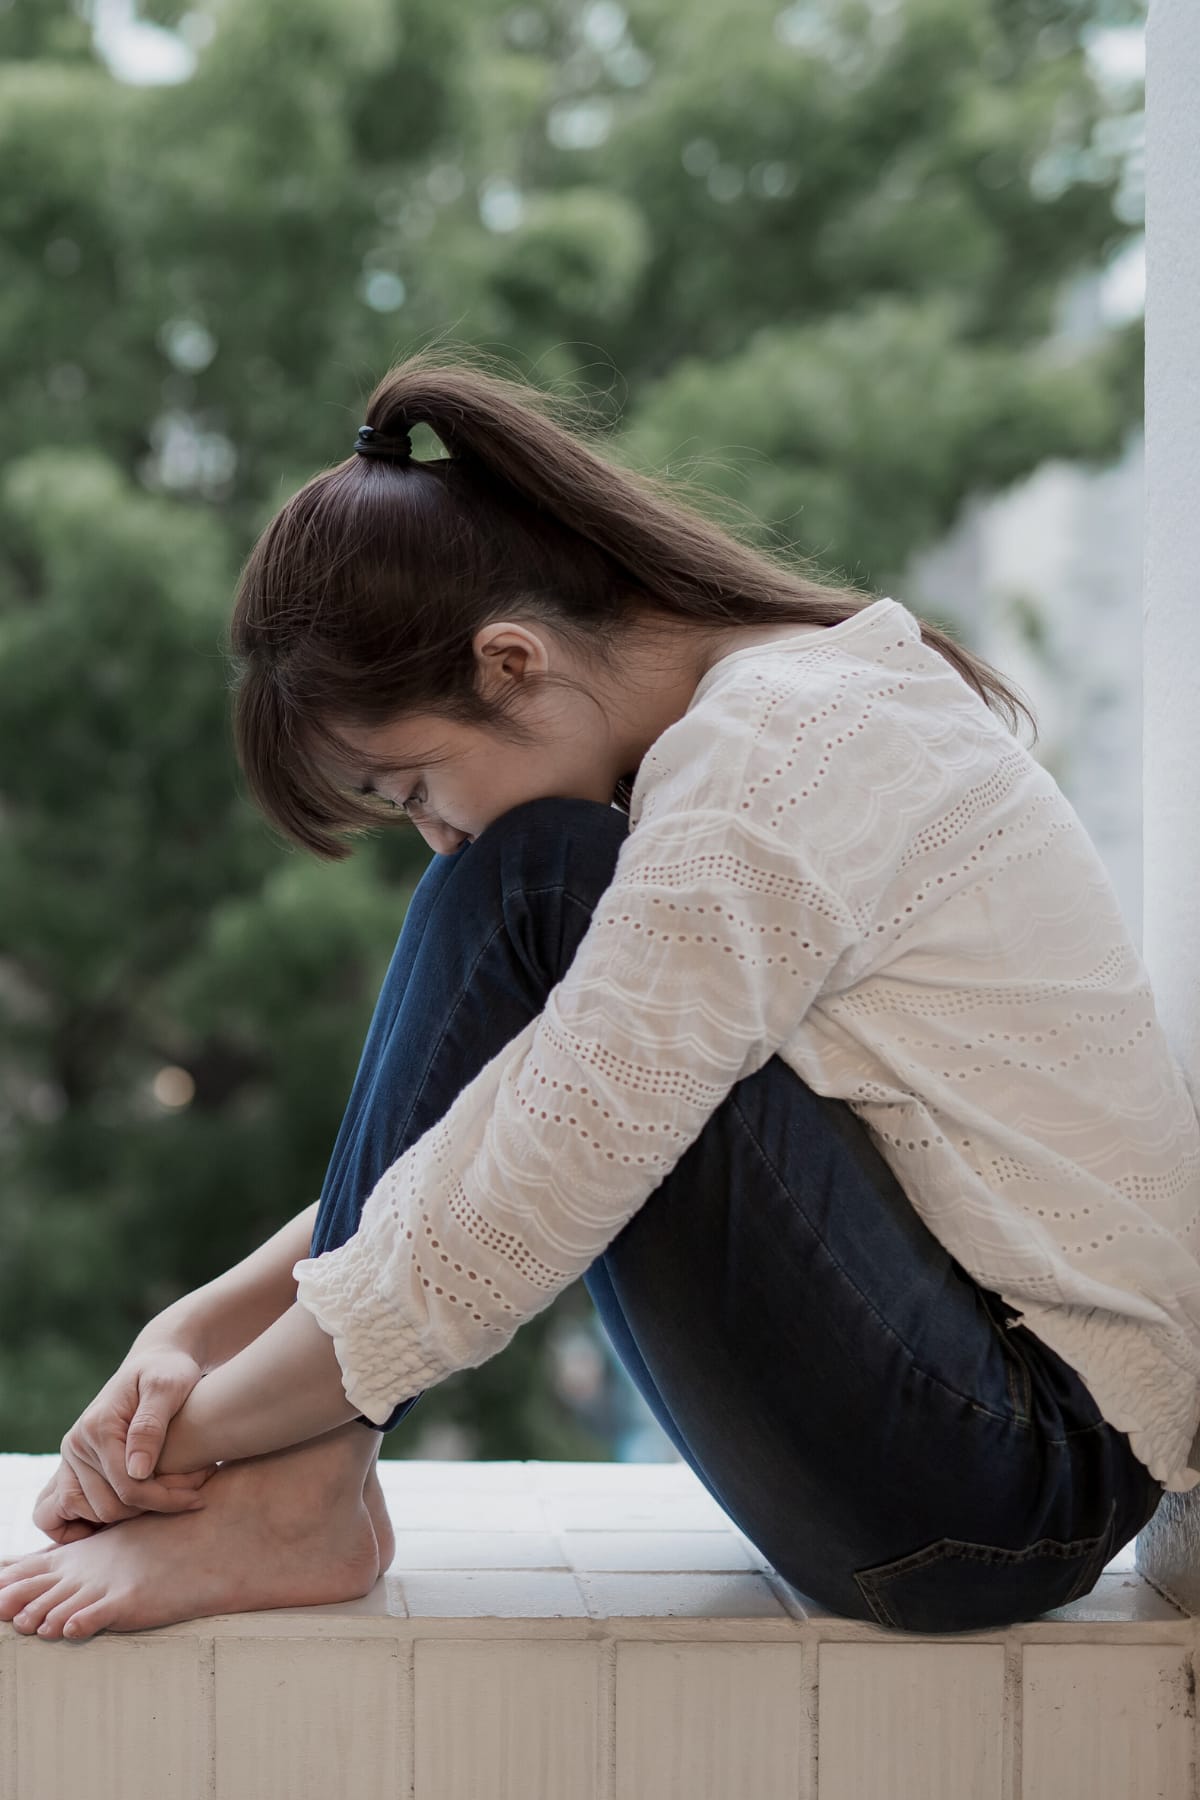 Feeling Alone And Depressed? How To Overcome These Emotions